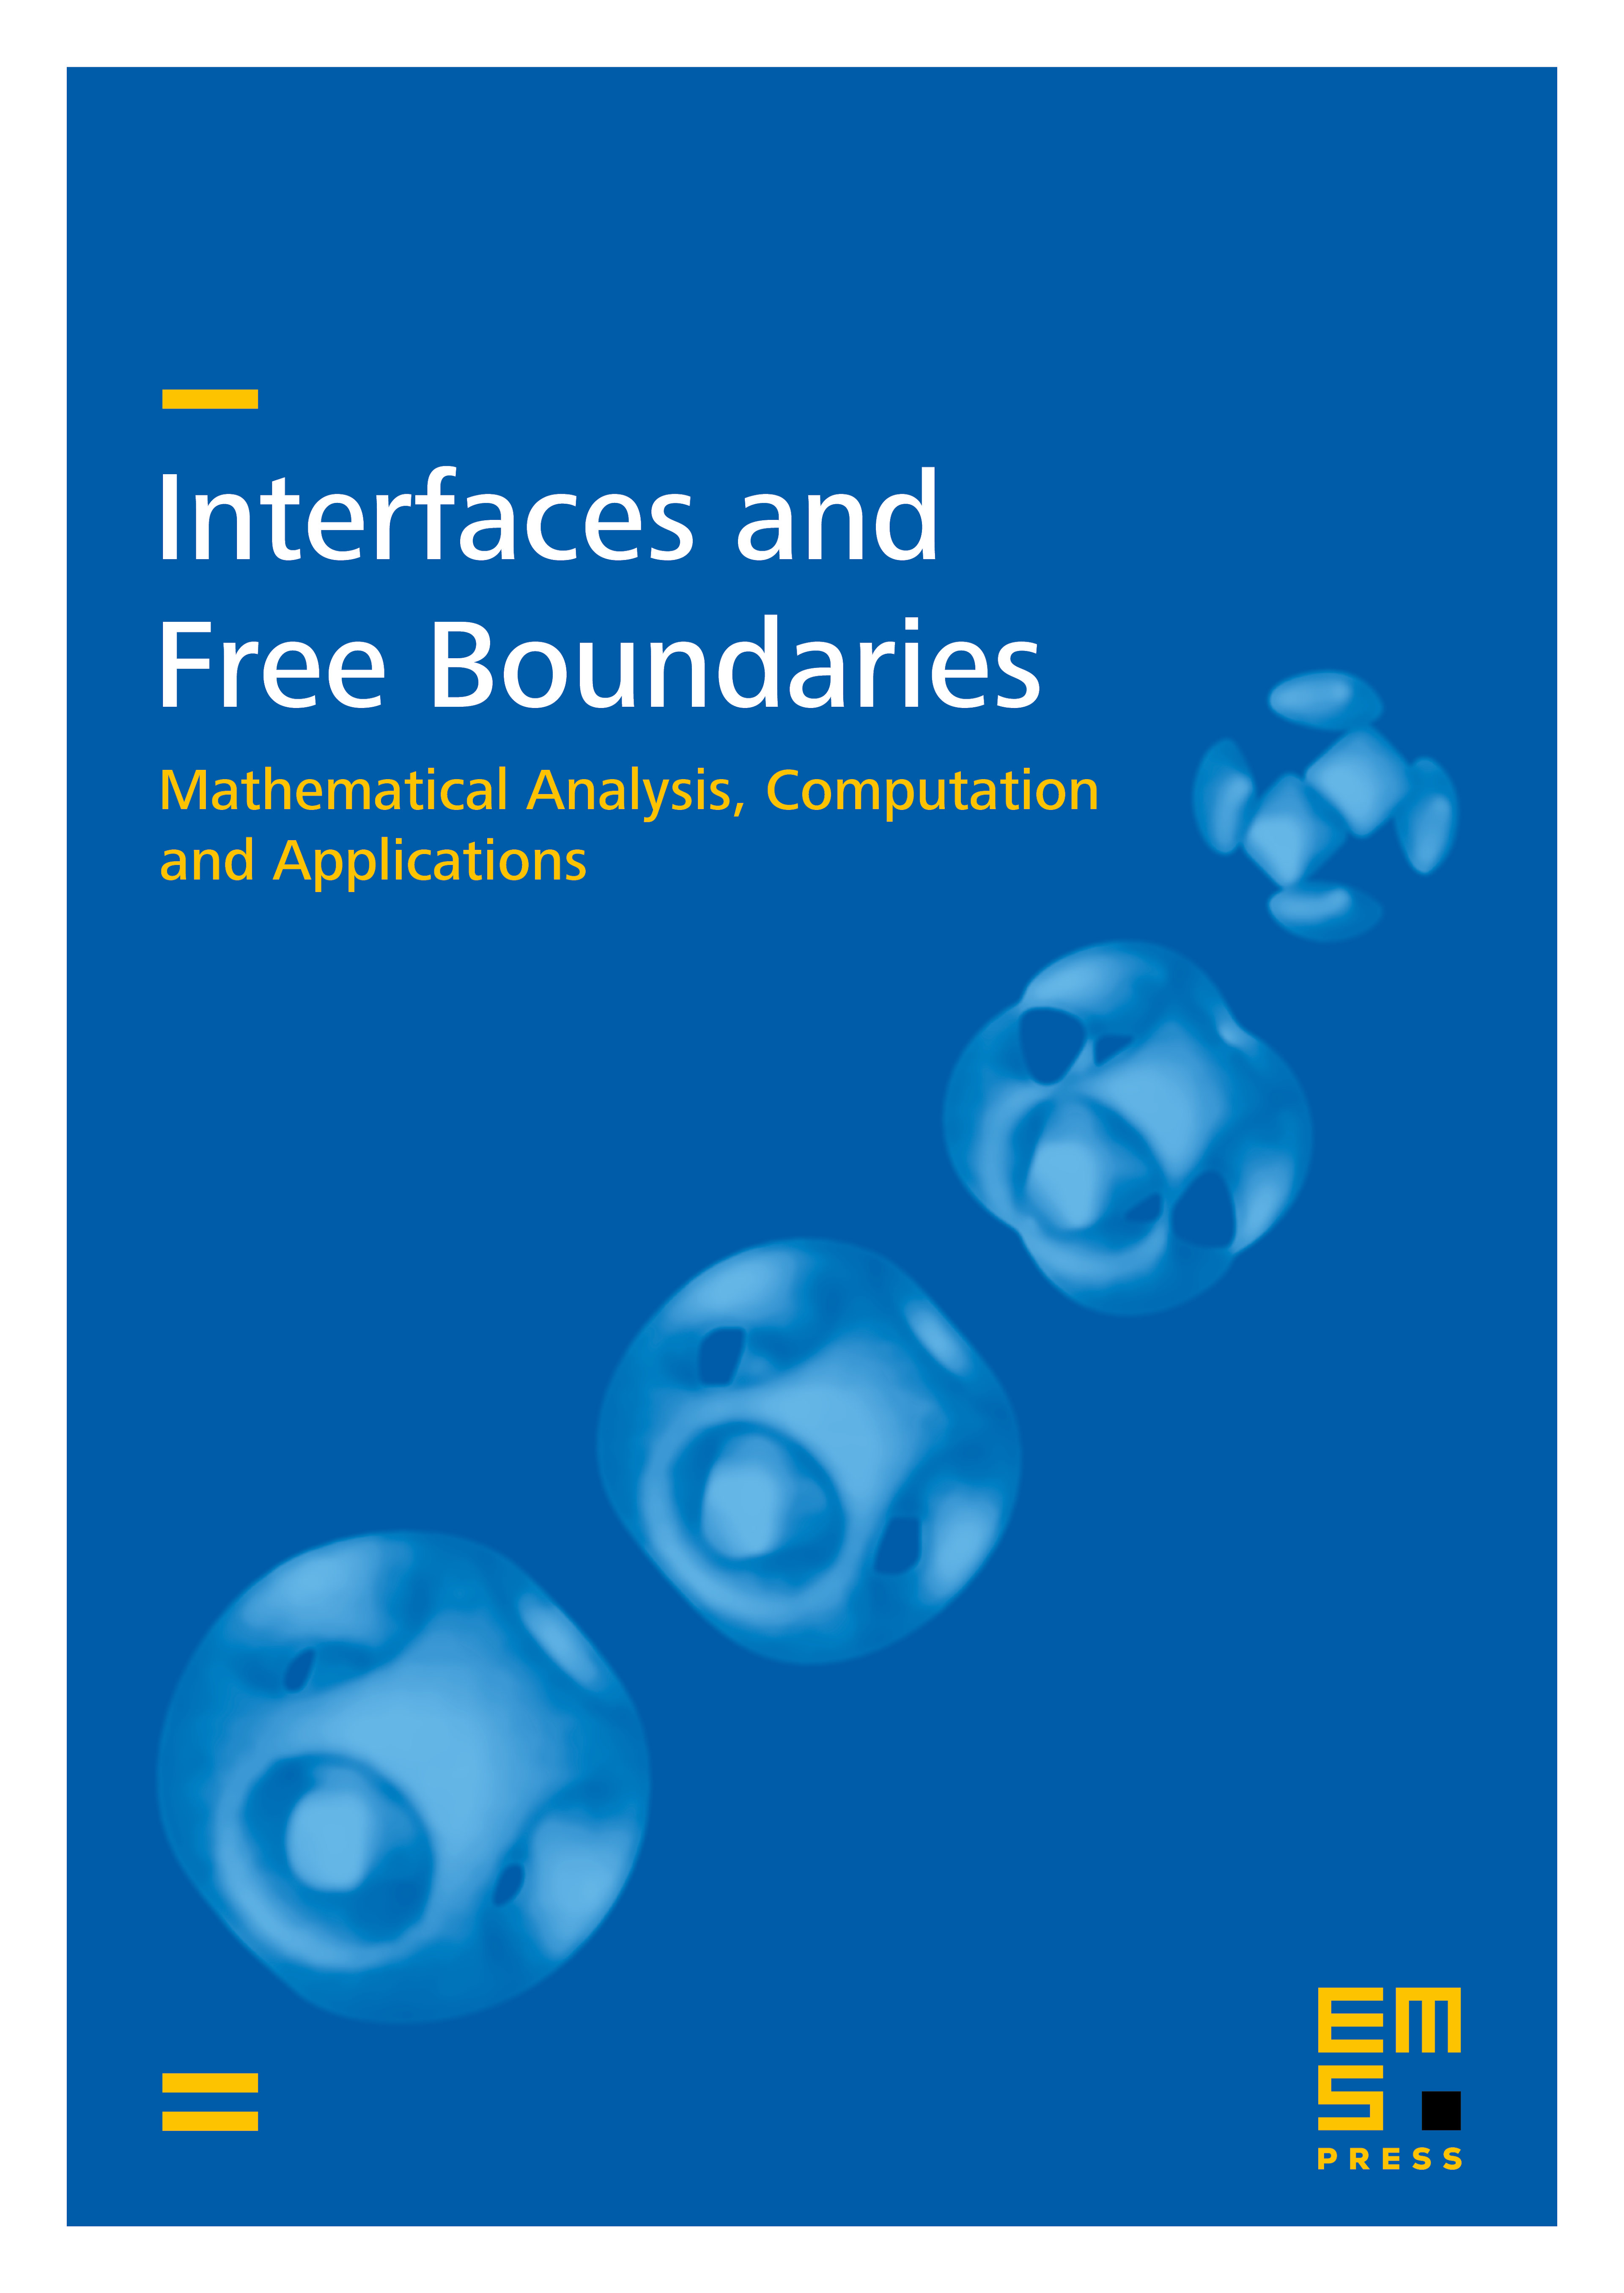 Interfaces and Free Boundaries | EMS Press